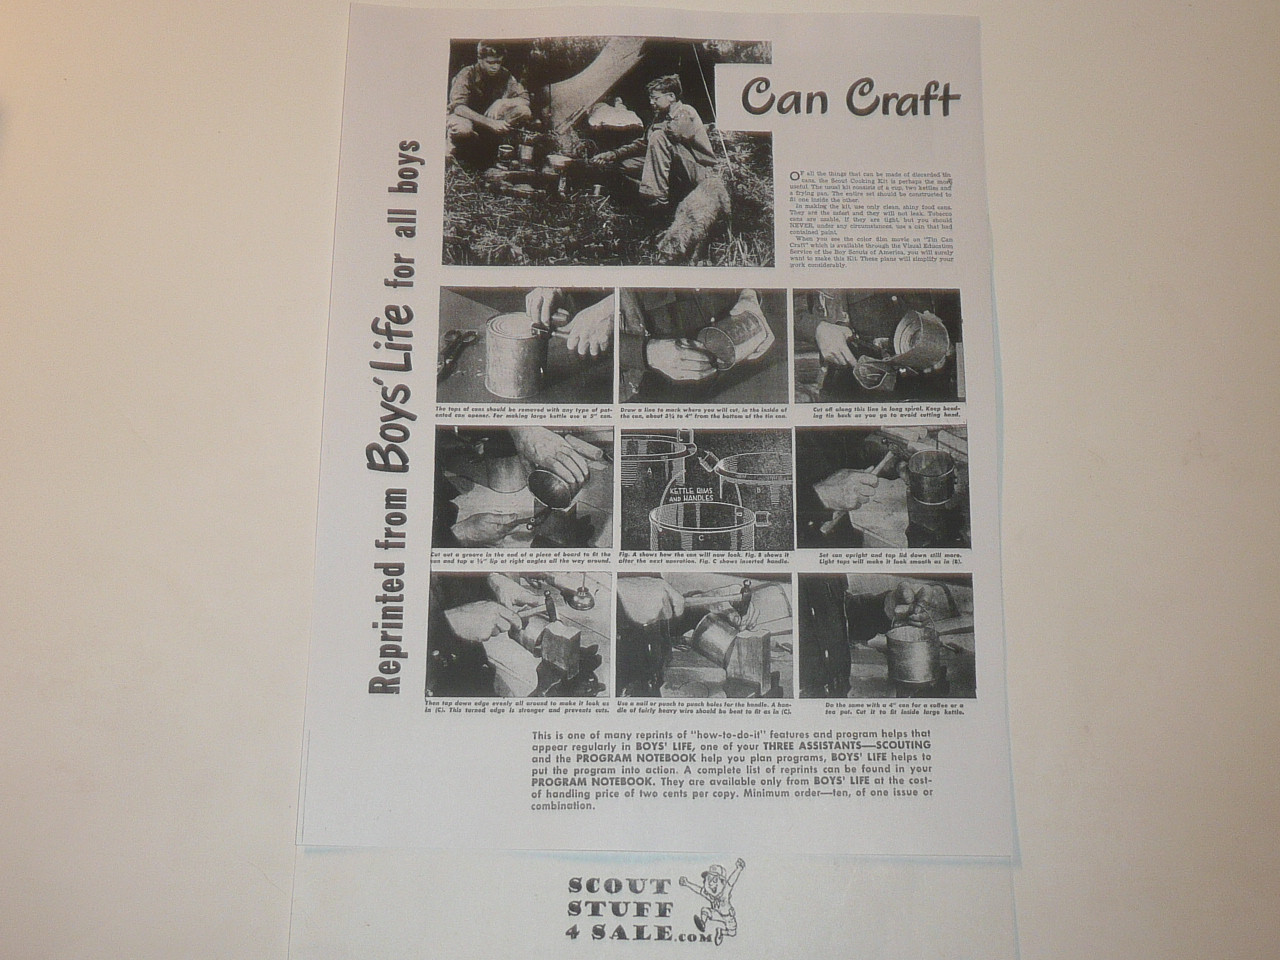 Can Craft, By Green Bar Bill, Boys' Life Single Topic Reprint from the 1950's - 1960's , written for Scouts, great teaching materials